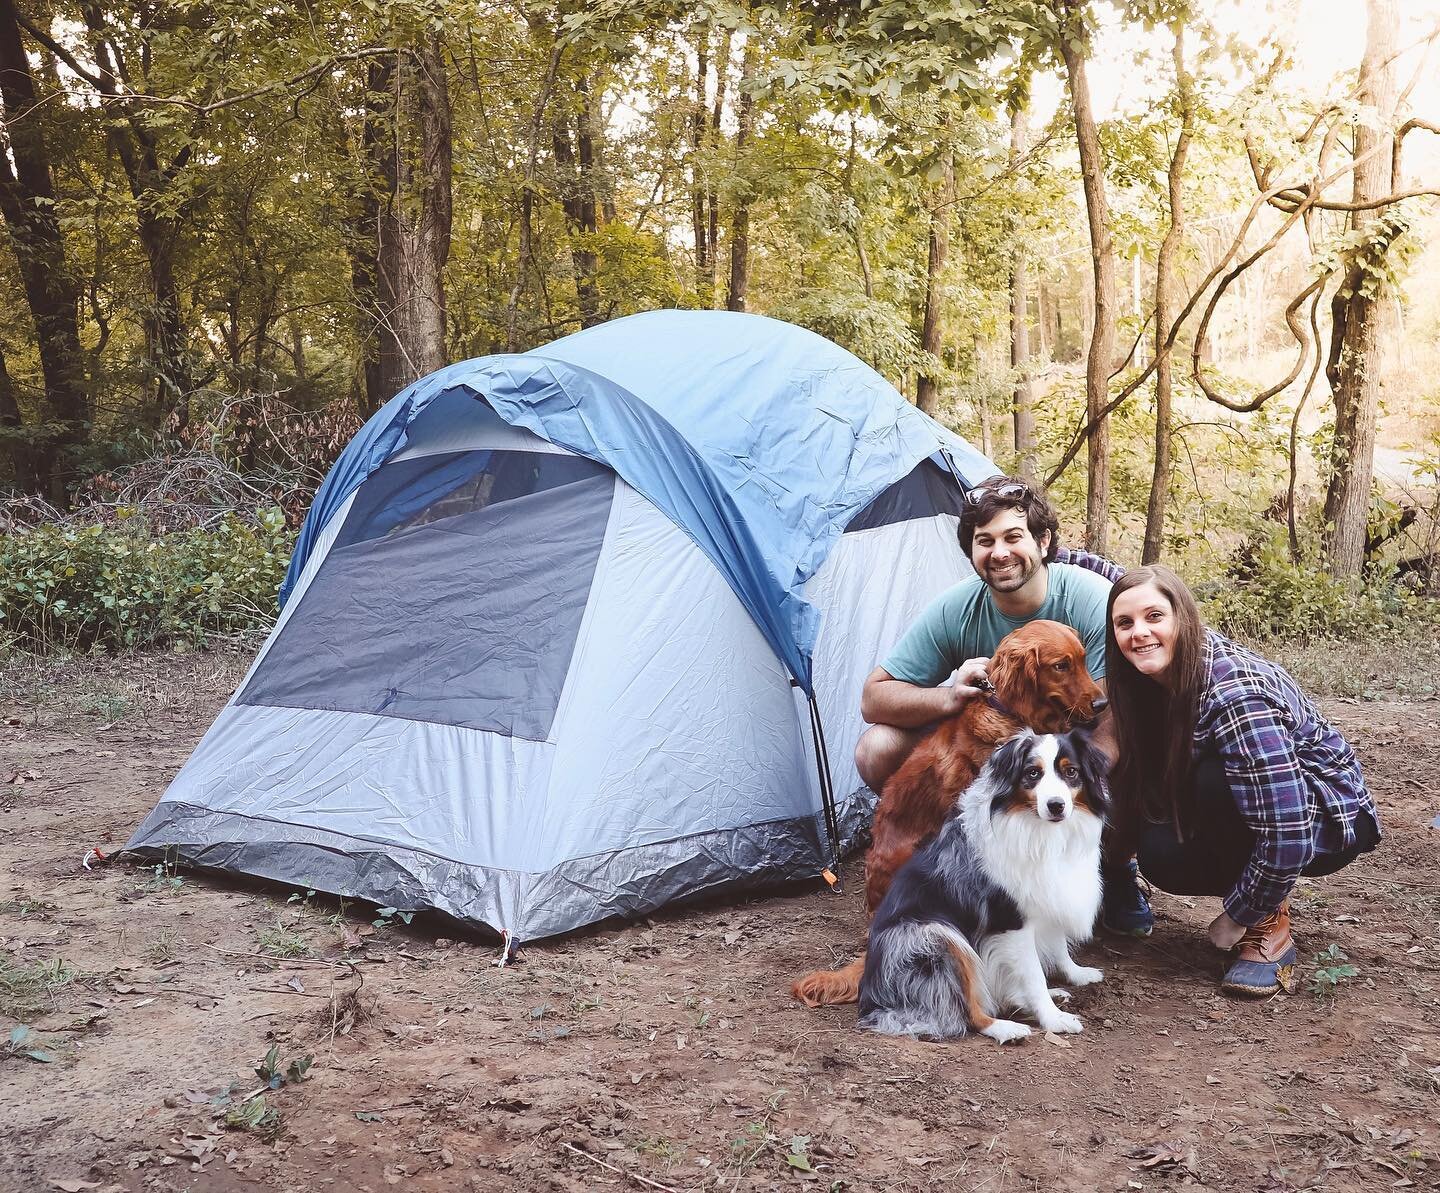 Gentry enjoys camping and hiking with his wife Paige.